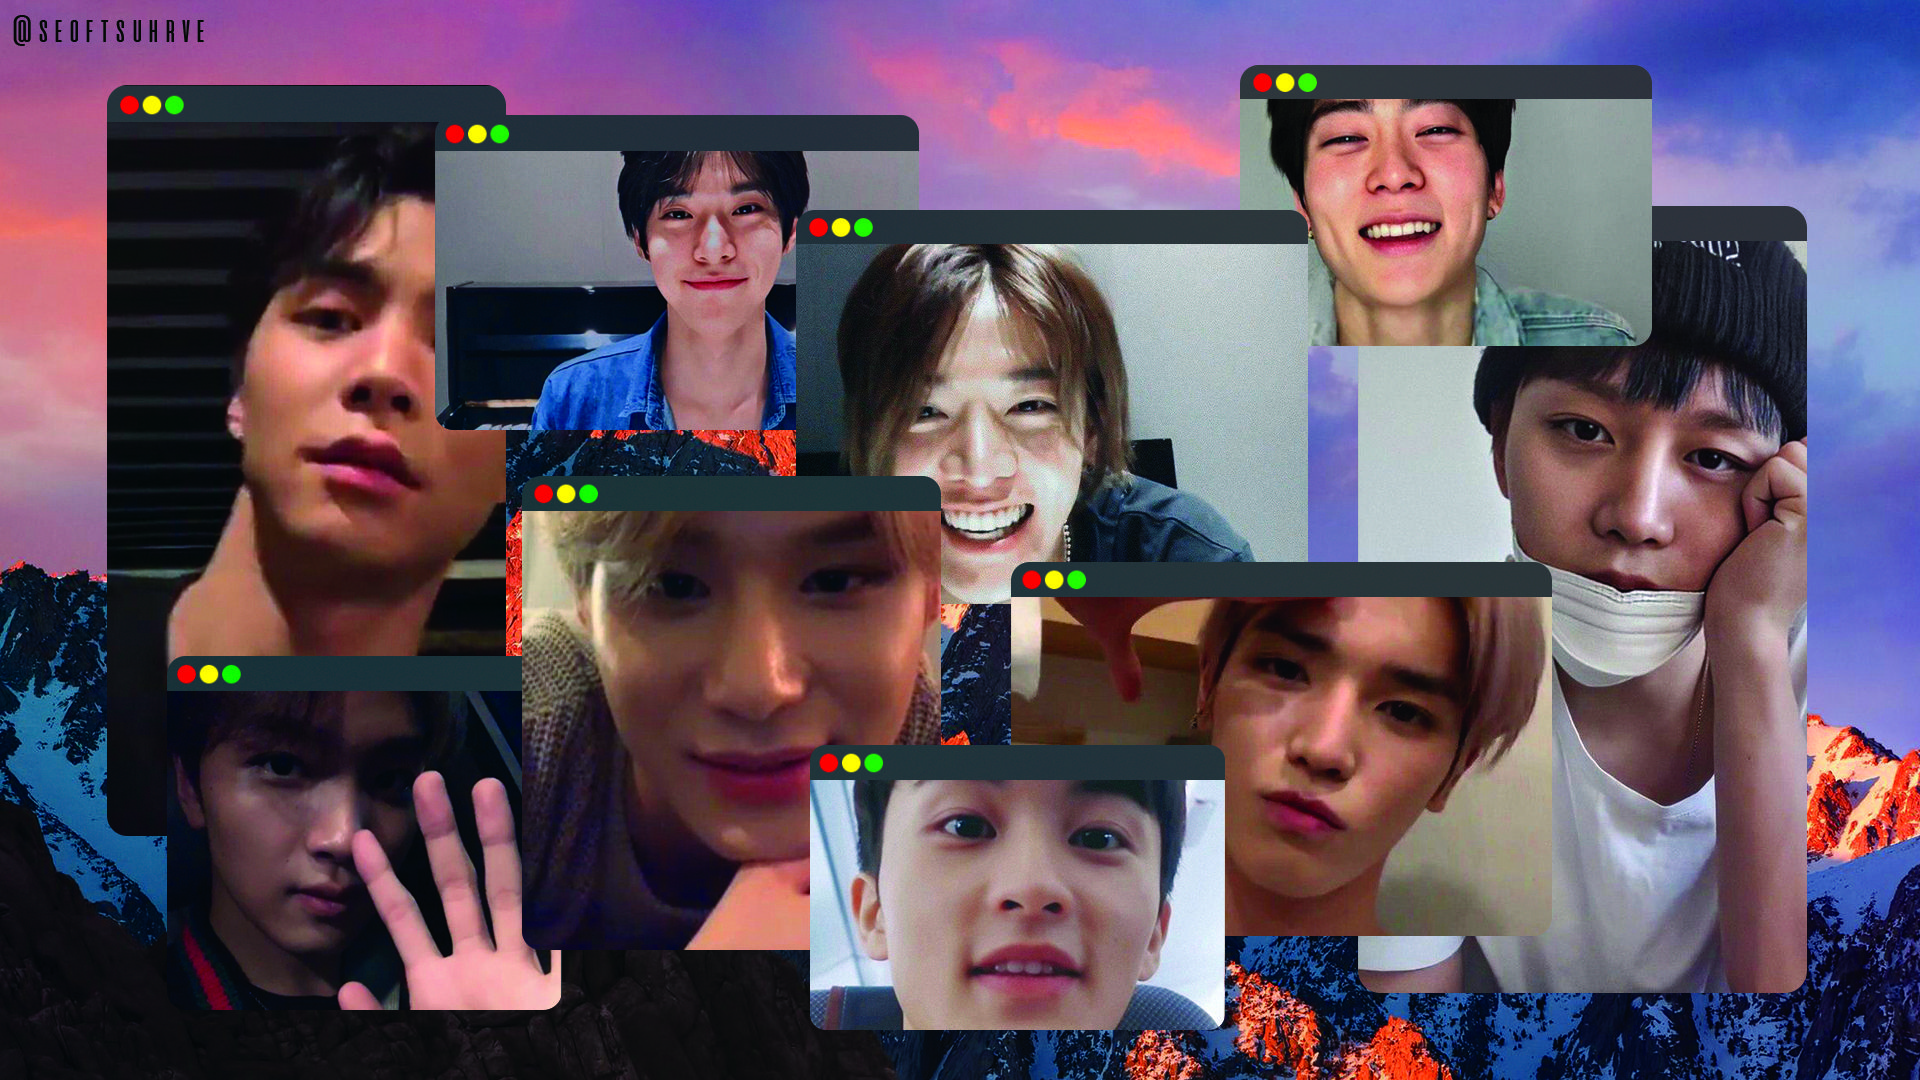 Nct aesthetic pc wallpapers